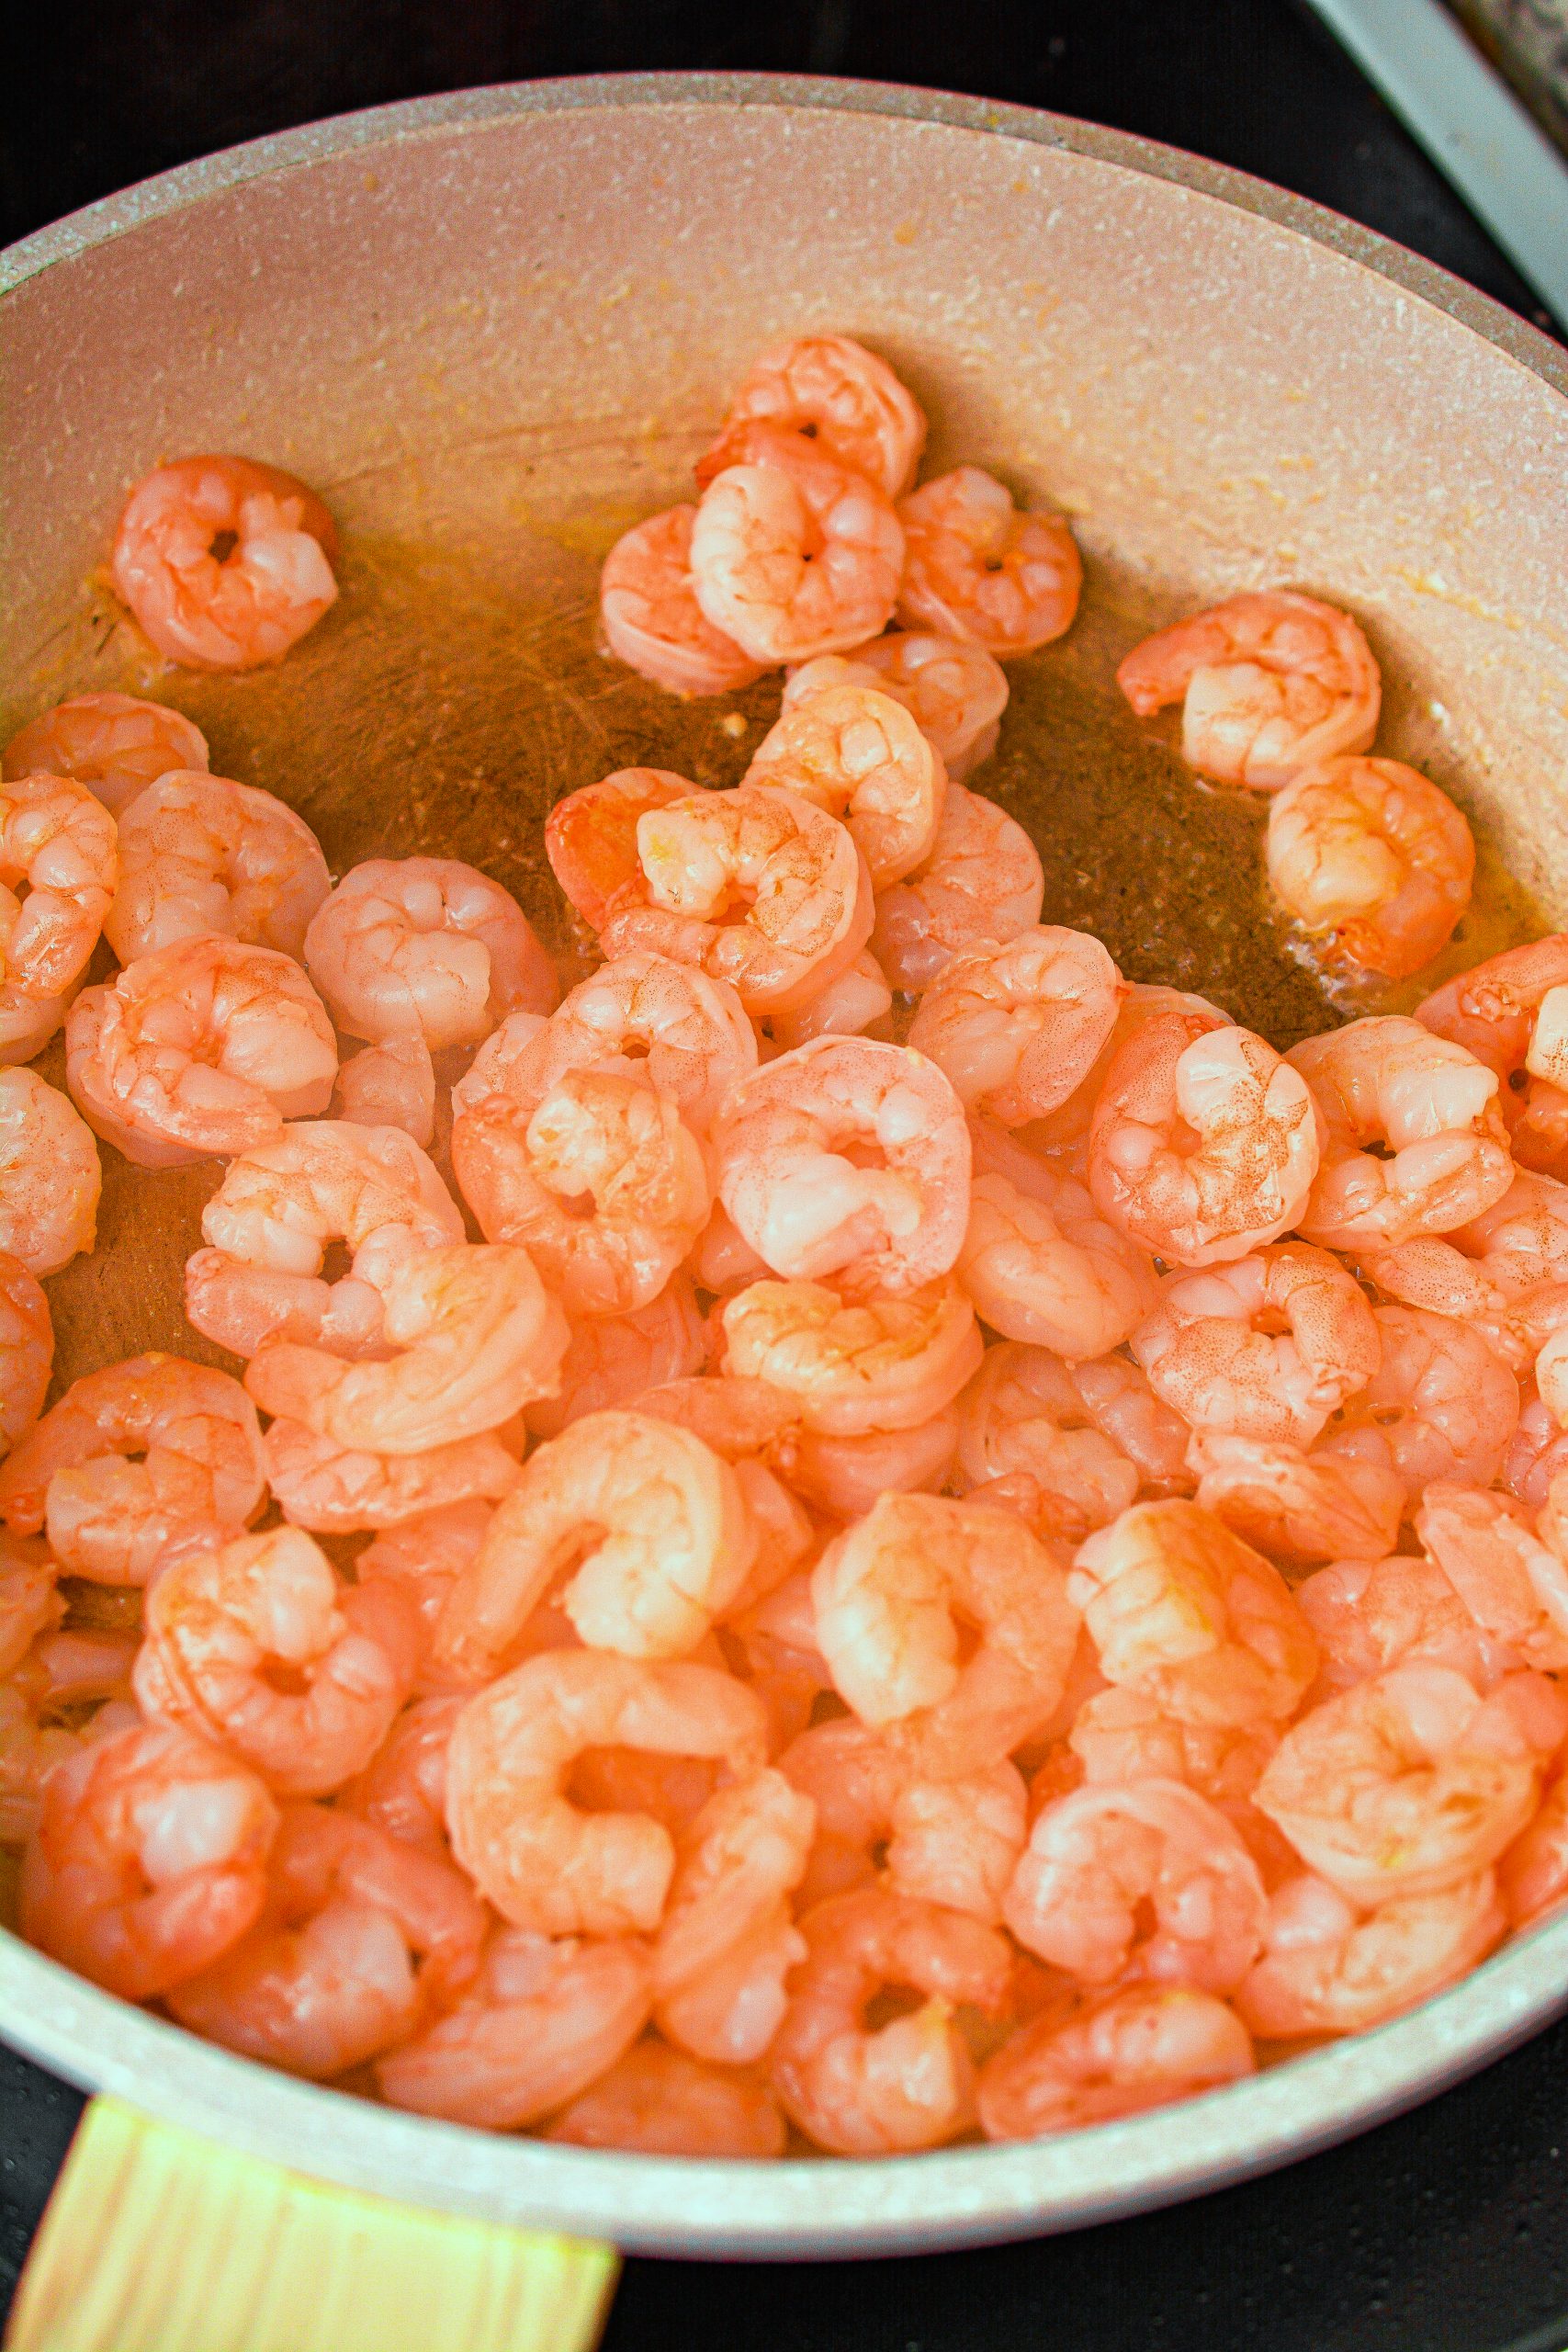 Add the butter to the skillet over medium-high heat, and cook the shrimp with some salt. Cook until done, and remove from the skillet to set aside